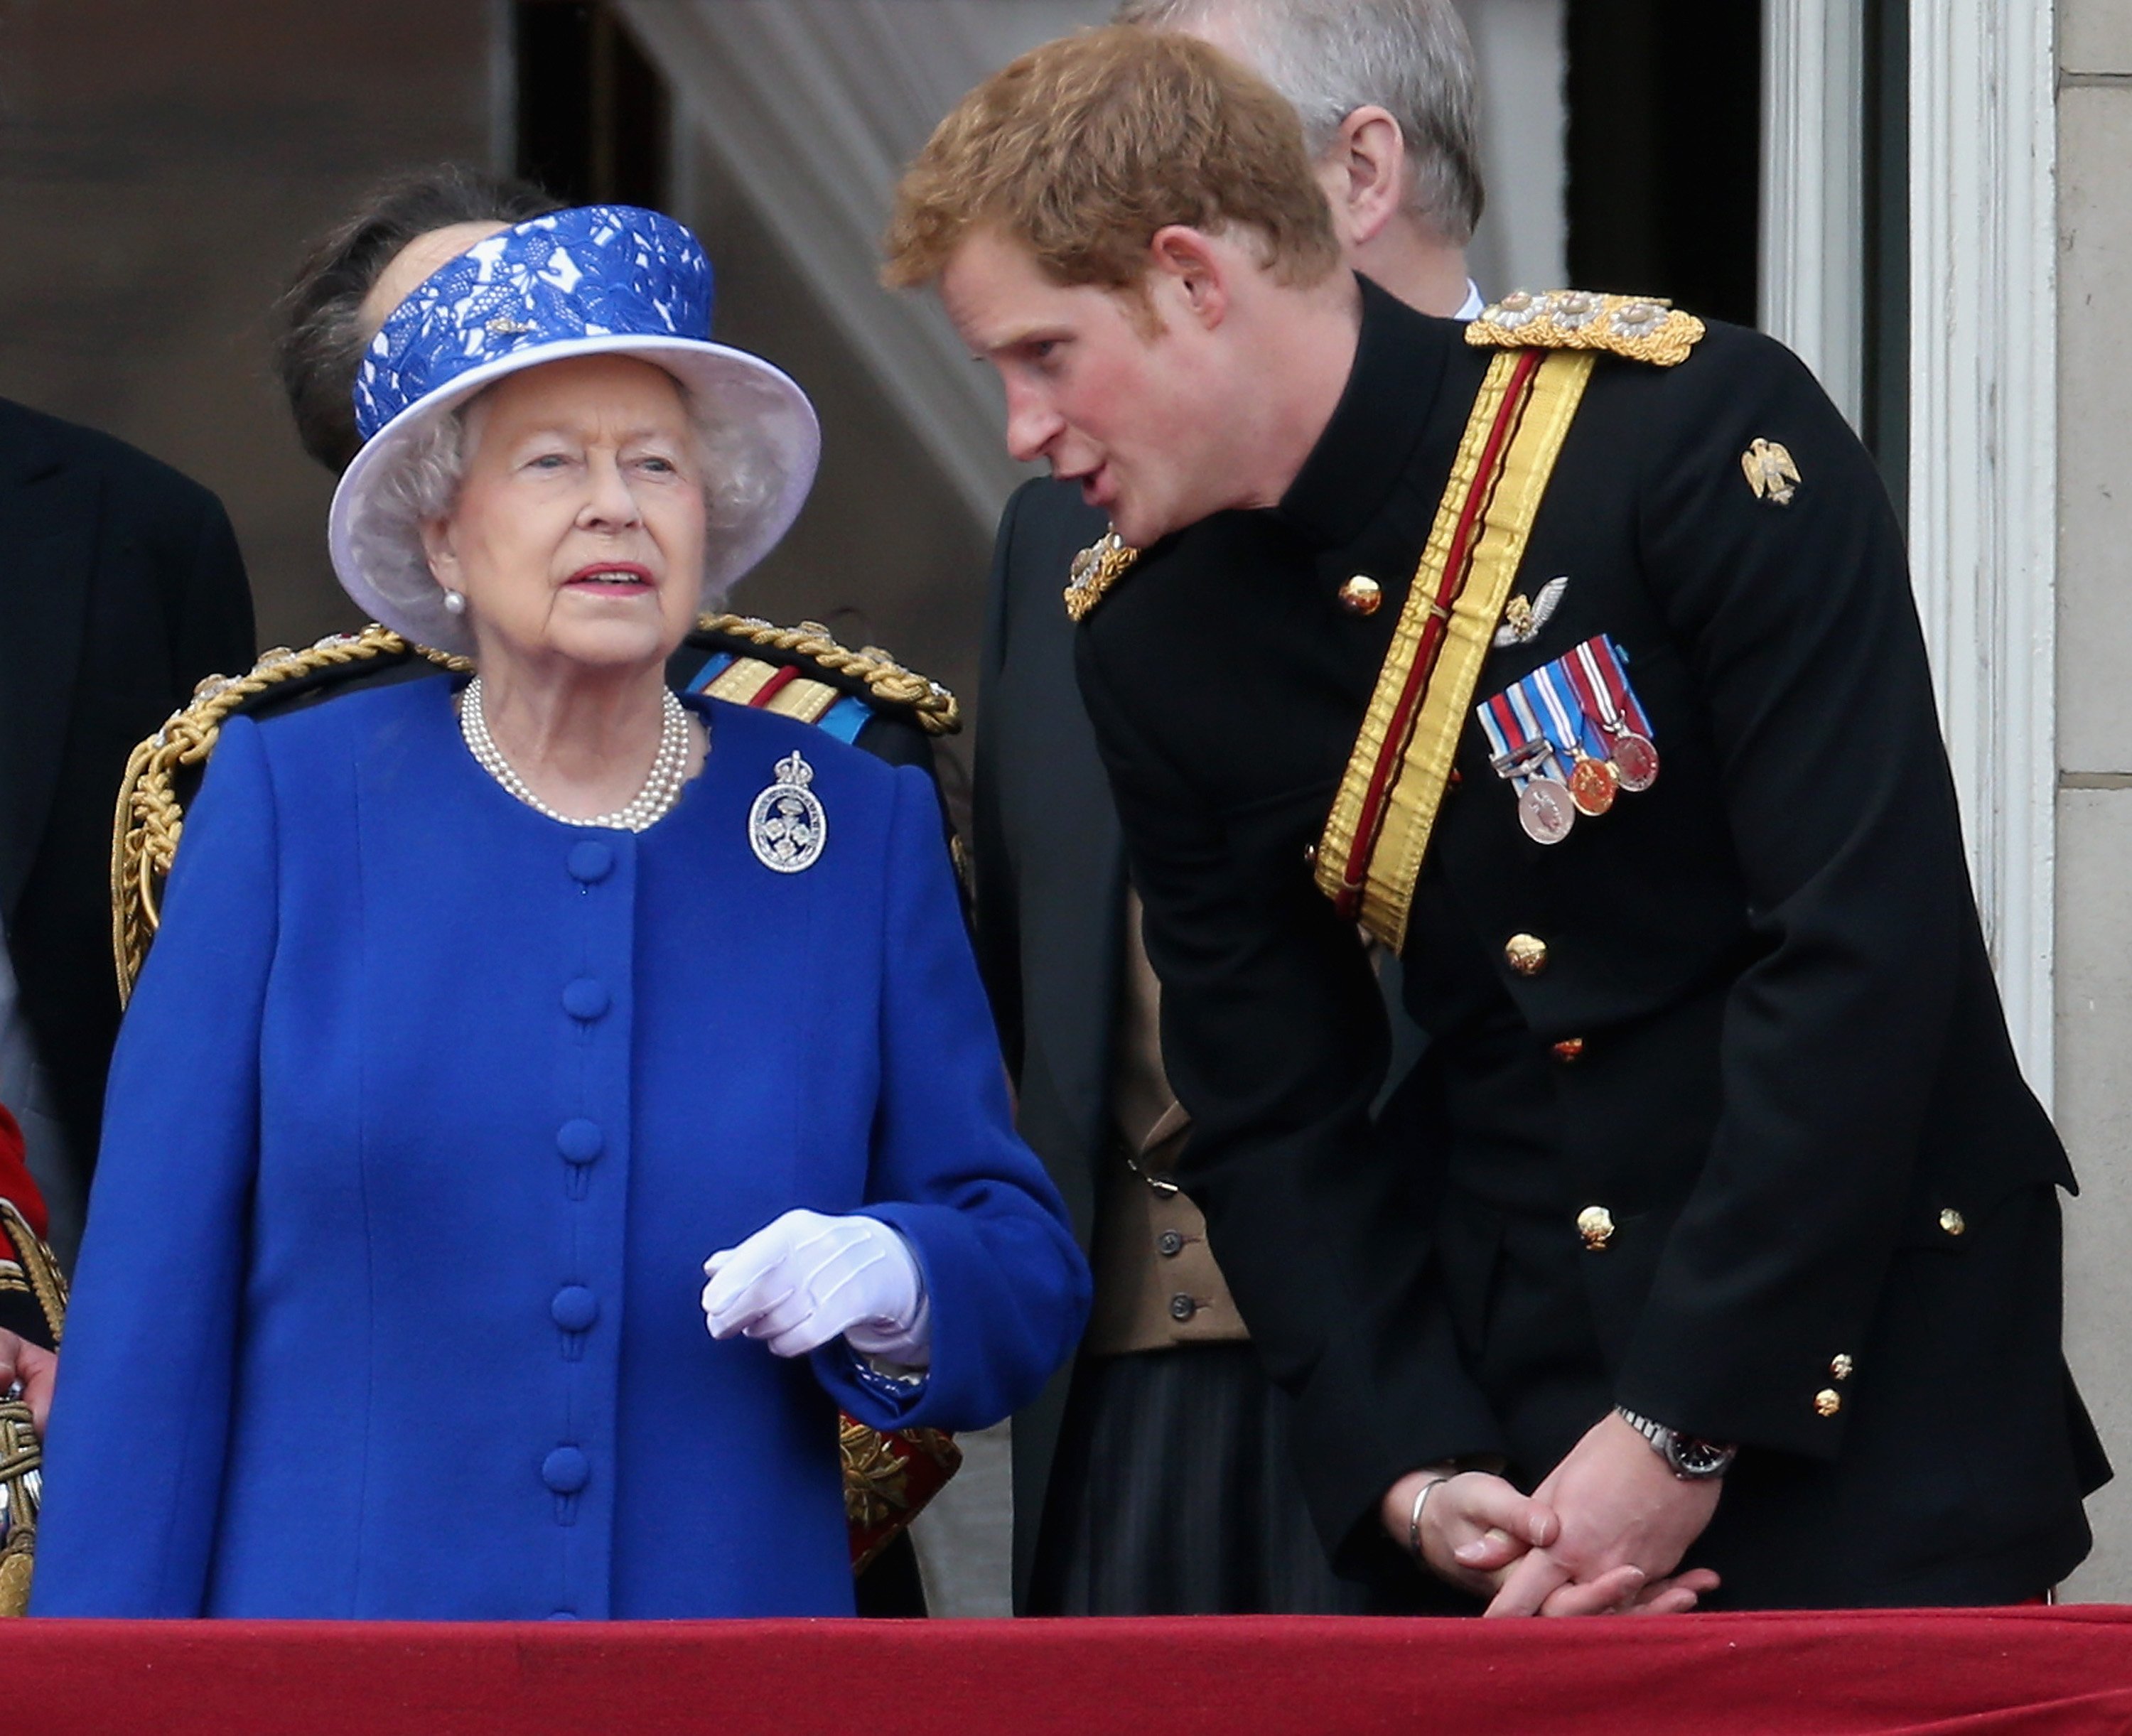 Prince Harry chats with Queen Elizabeth II on the balcony of Buckingham Palace during the annual Trooping the Colour Ceremony on June 15, 2013, in London, England. | Source: Getty Images